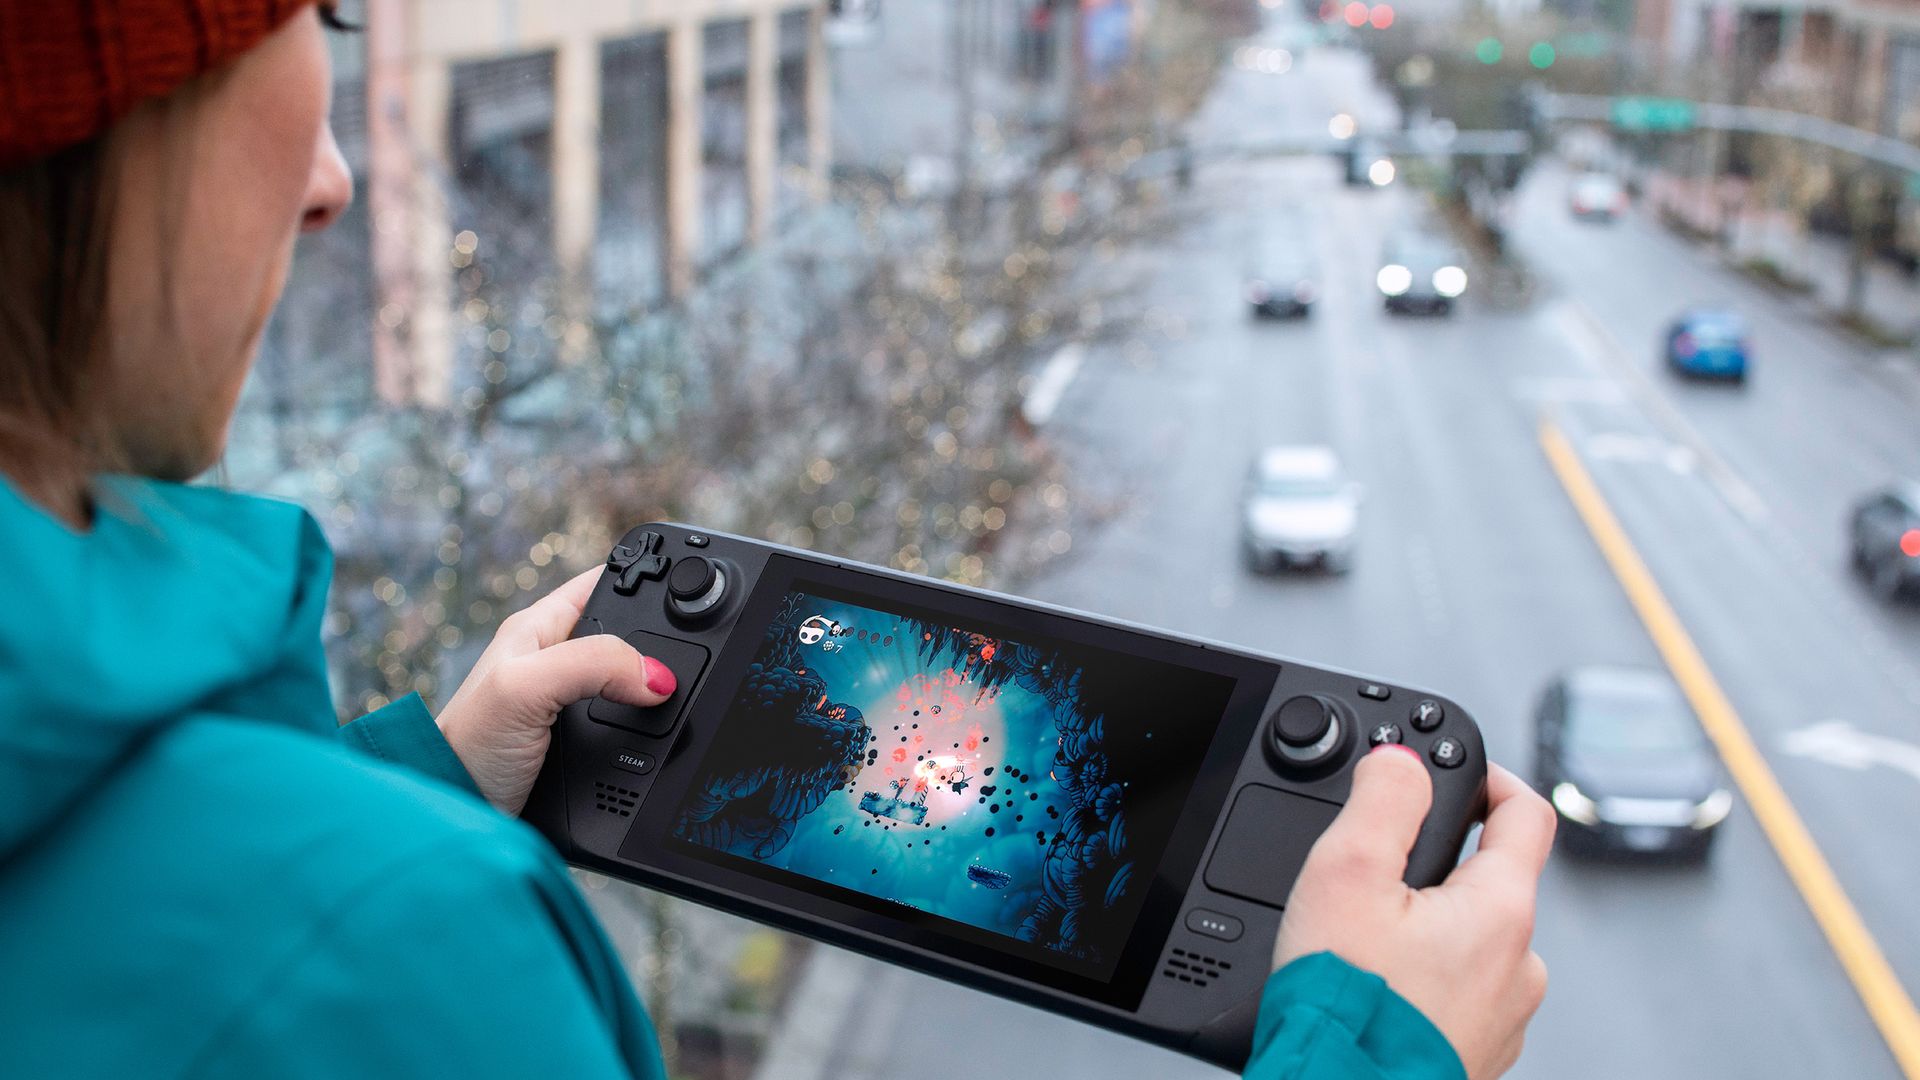 A woman plays a handheld gaming device while standing near a busy highway.